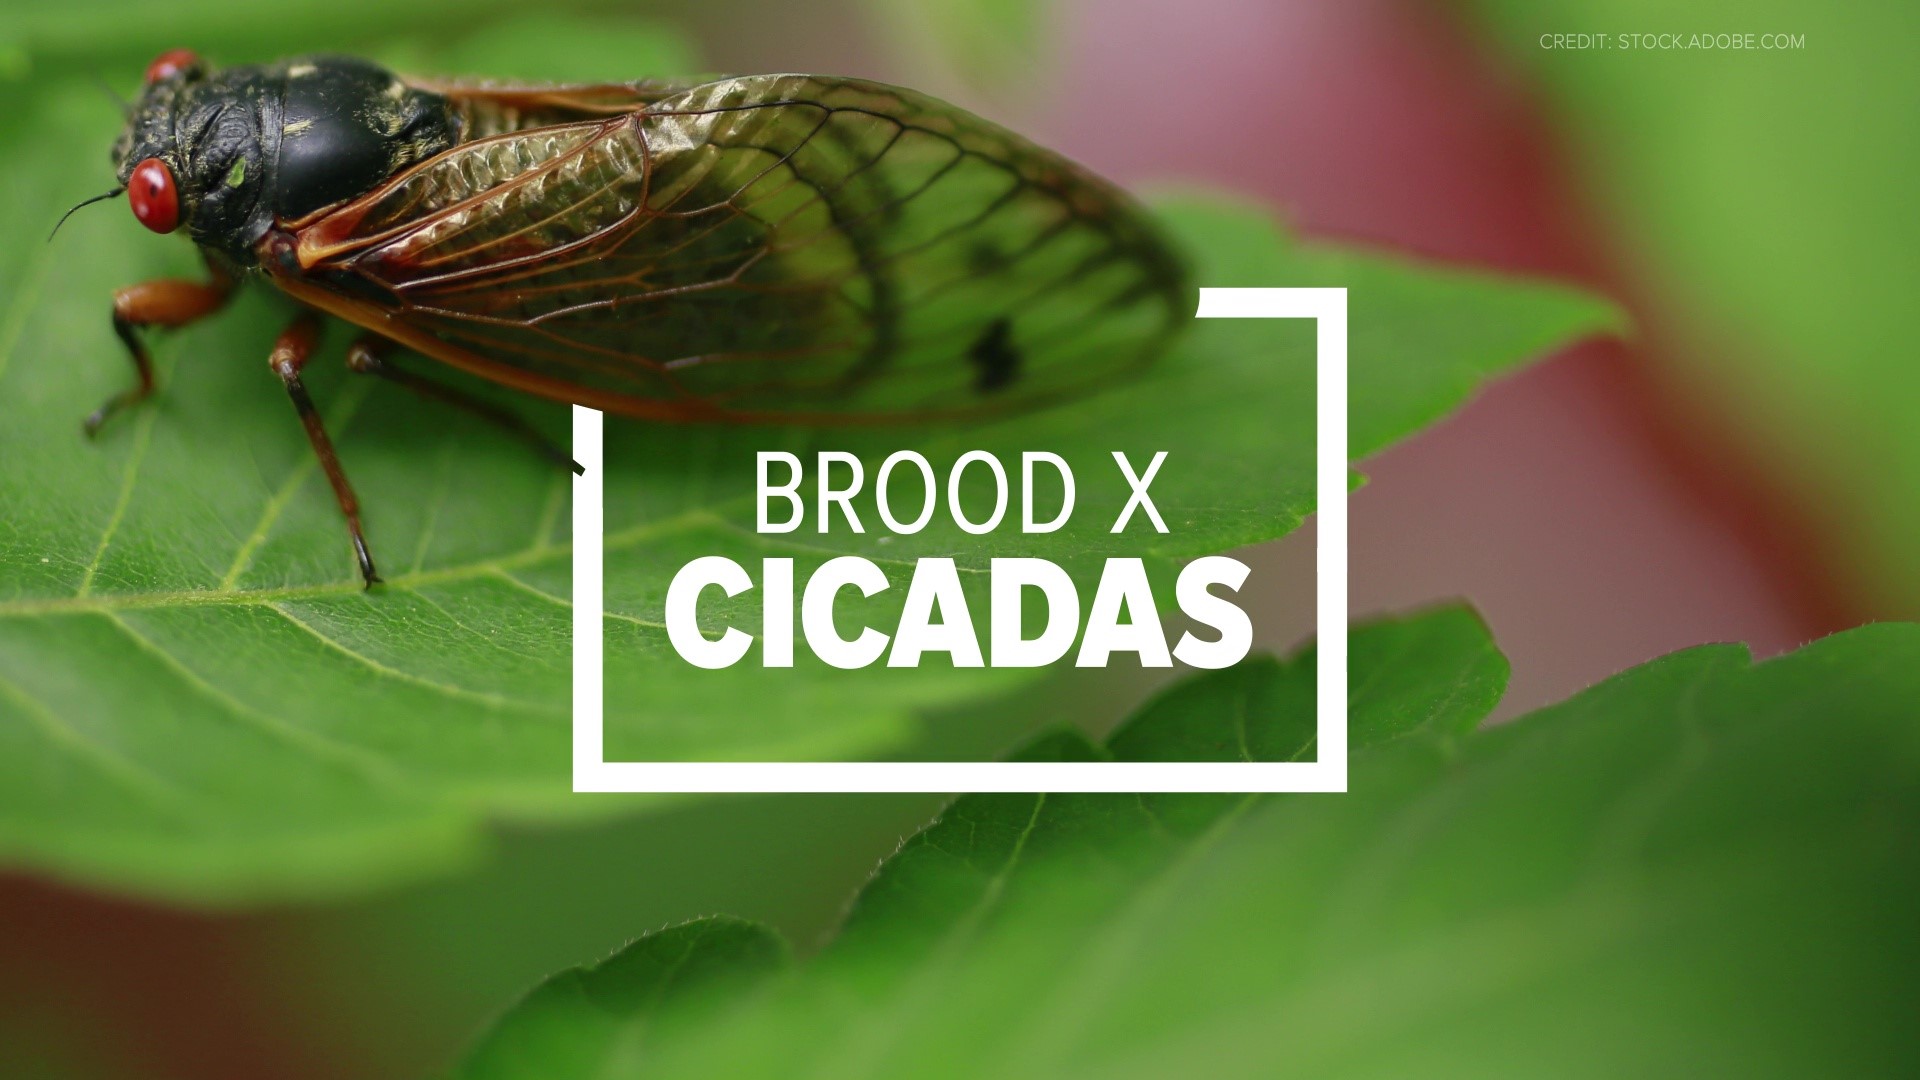 The Brood X cicada should emerge in the Lackawanna County area for the first time in 17 years within the next few weeks when the soil temperature gets warm enough.